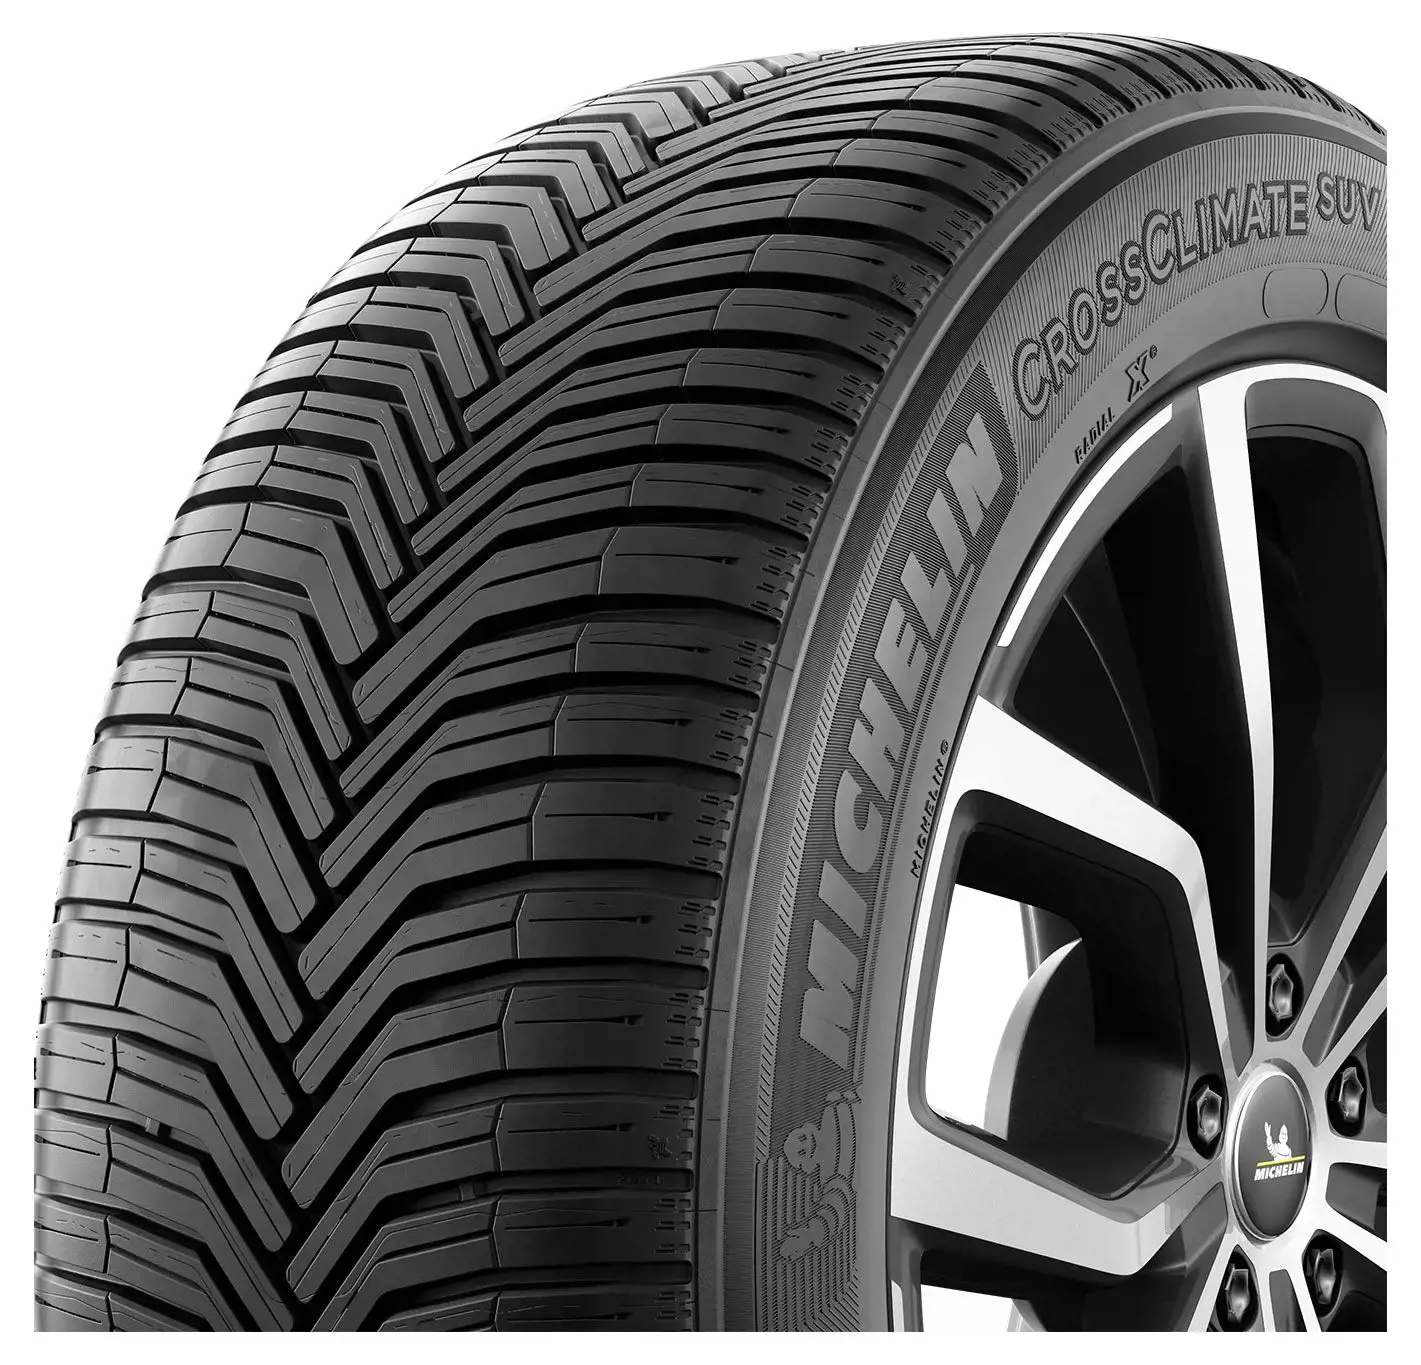 235/60 R17 106V CrossClimate SUV XL M+S